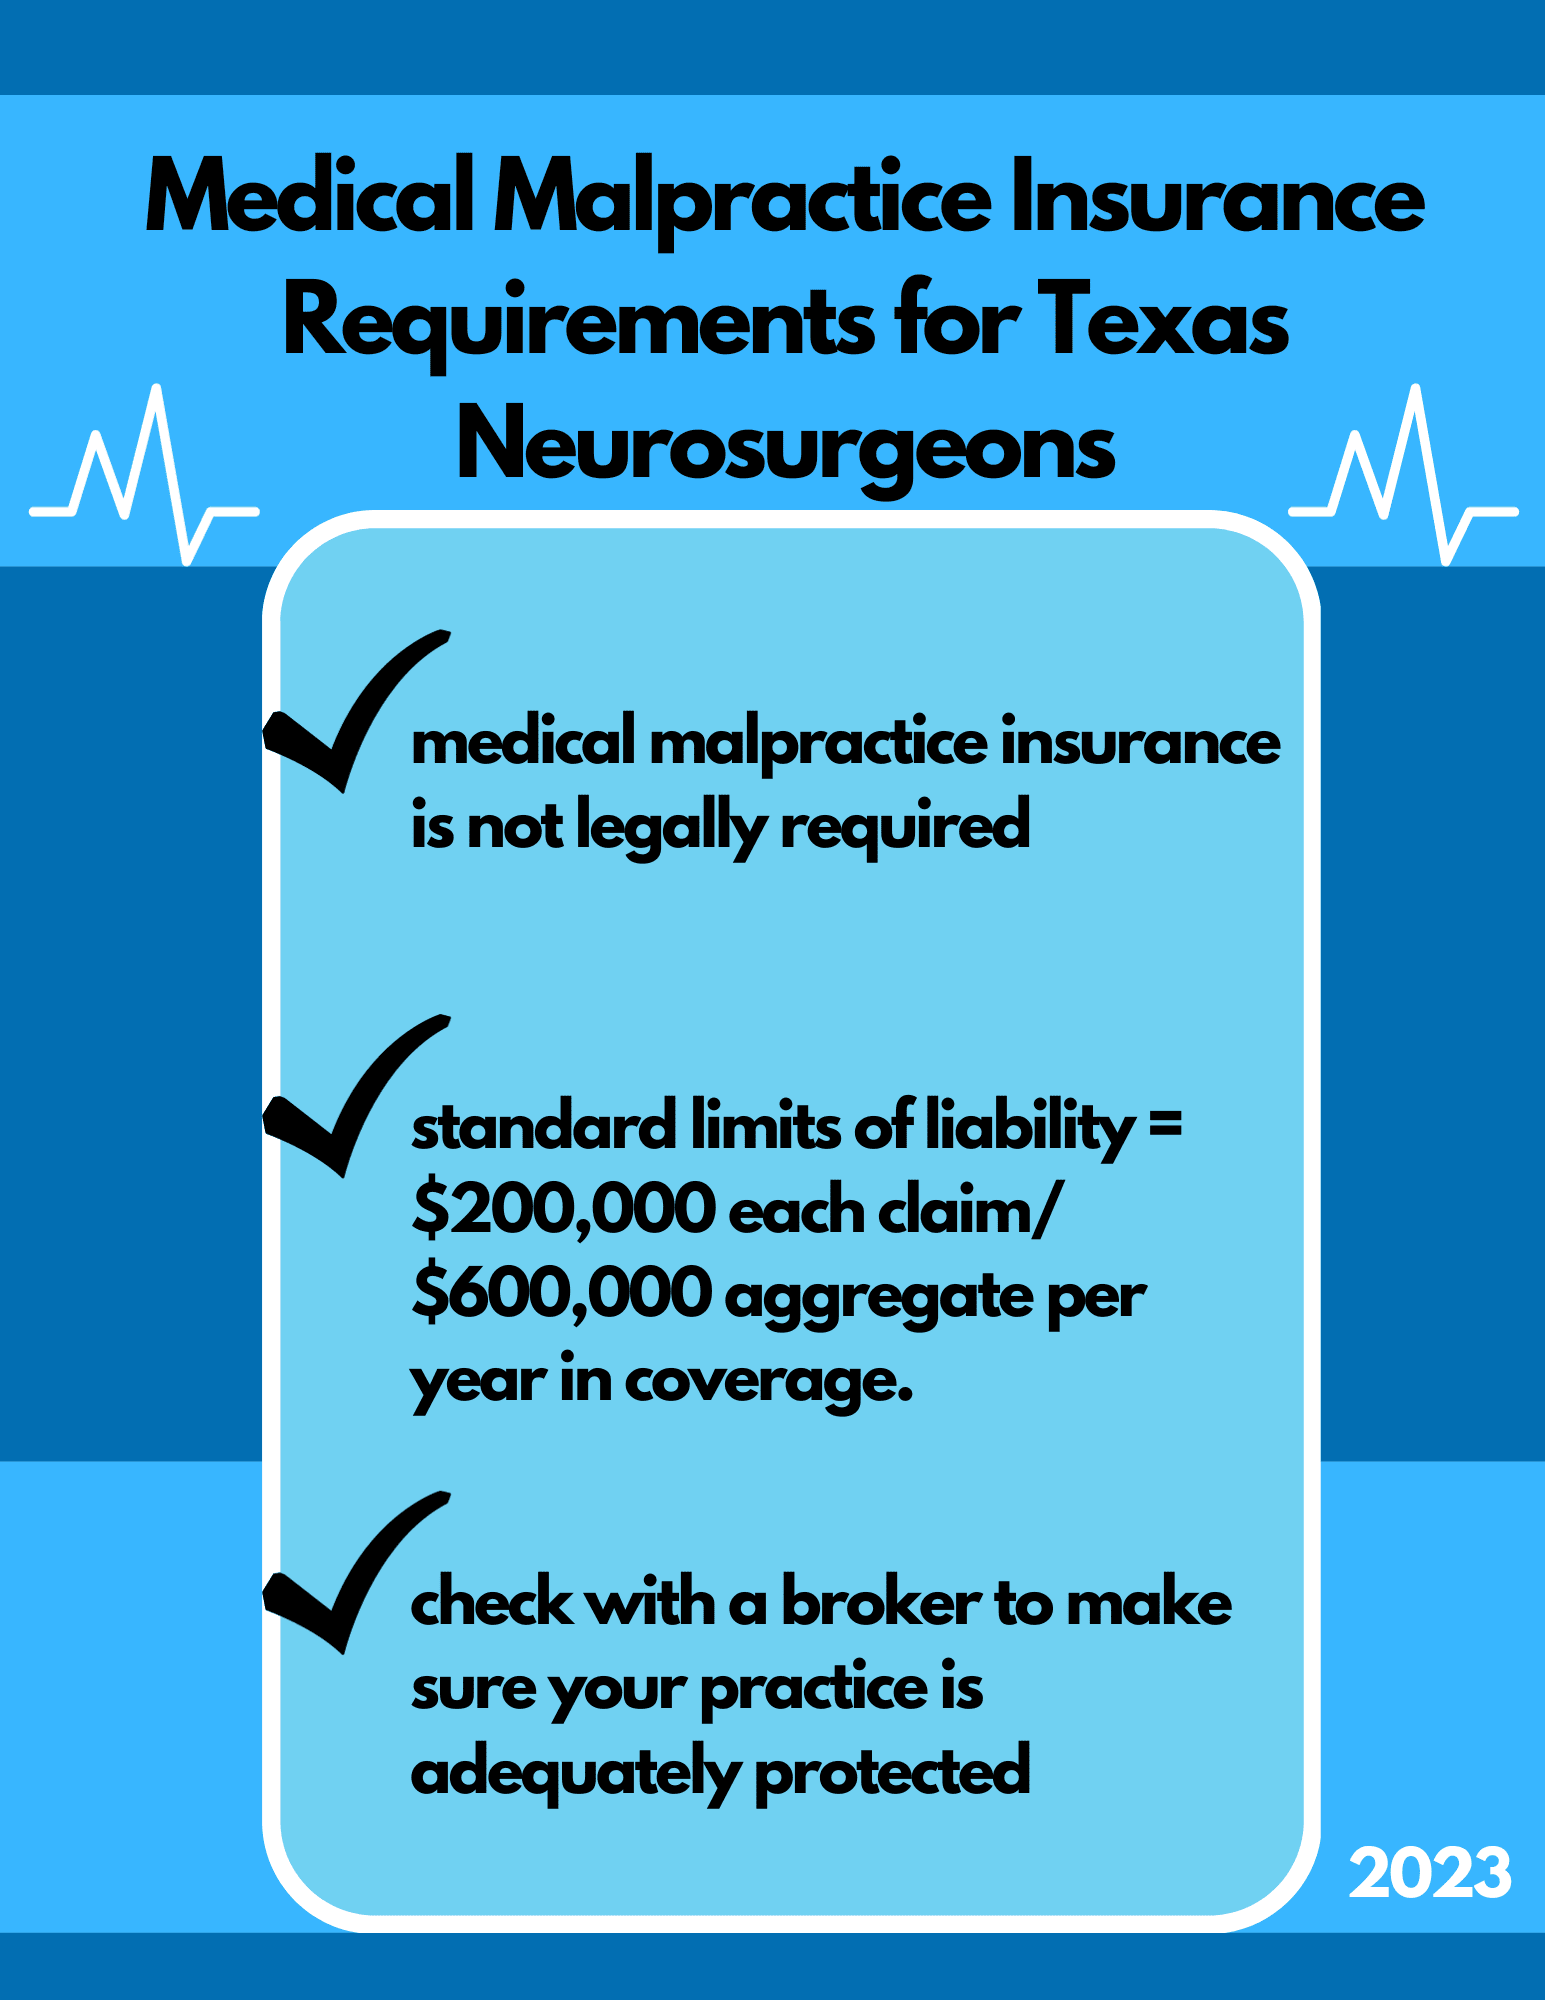 Medical Malpractice Insurance Requirements for TX Neurosurgeons